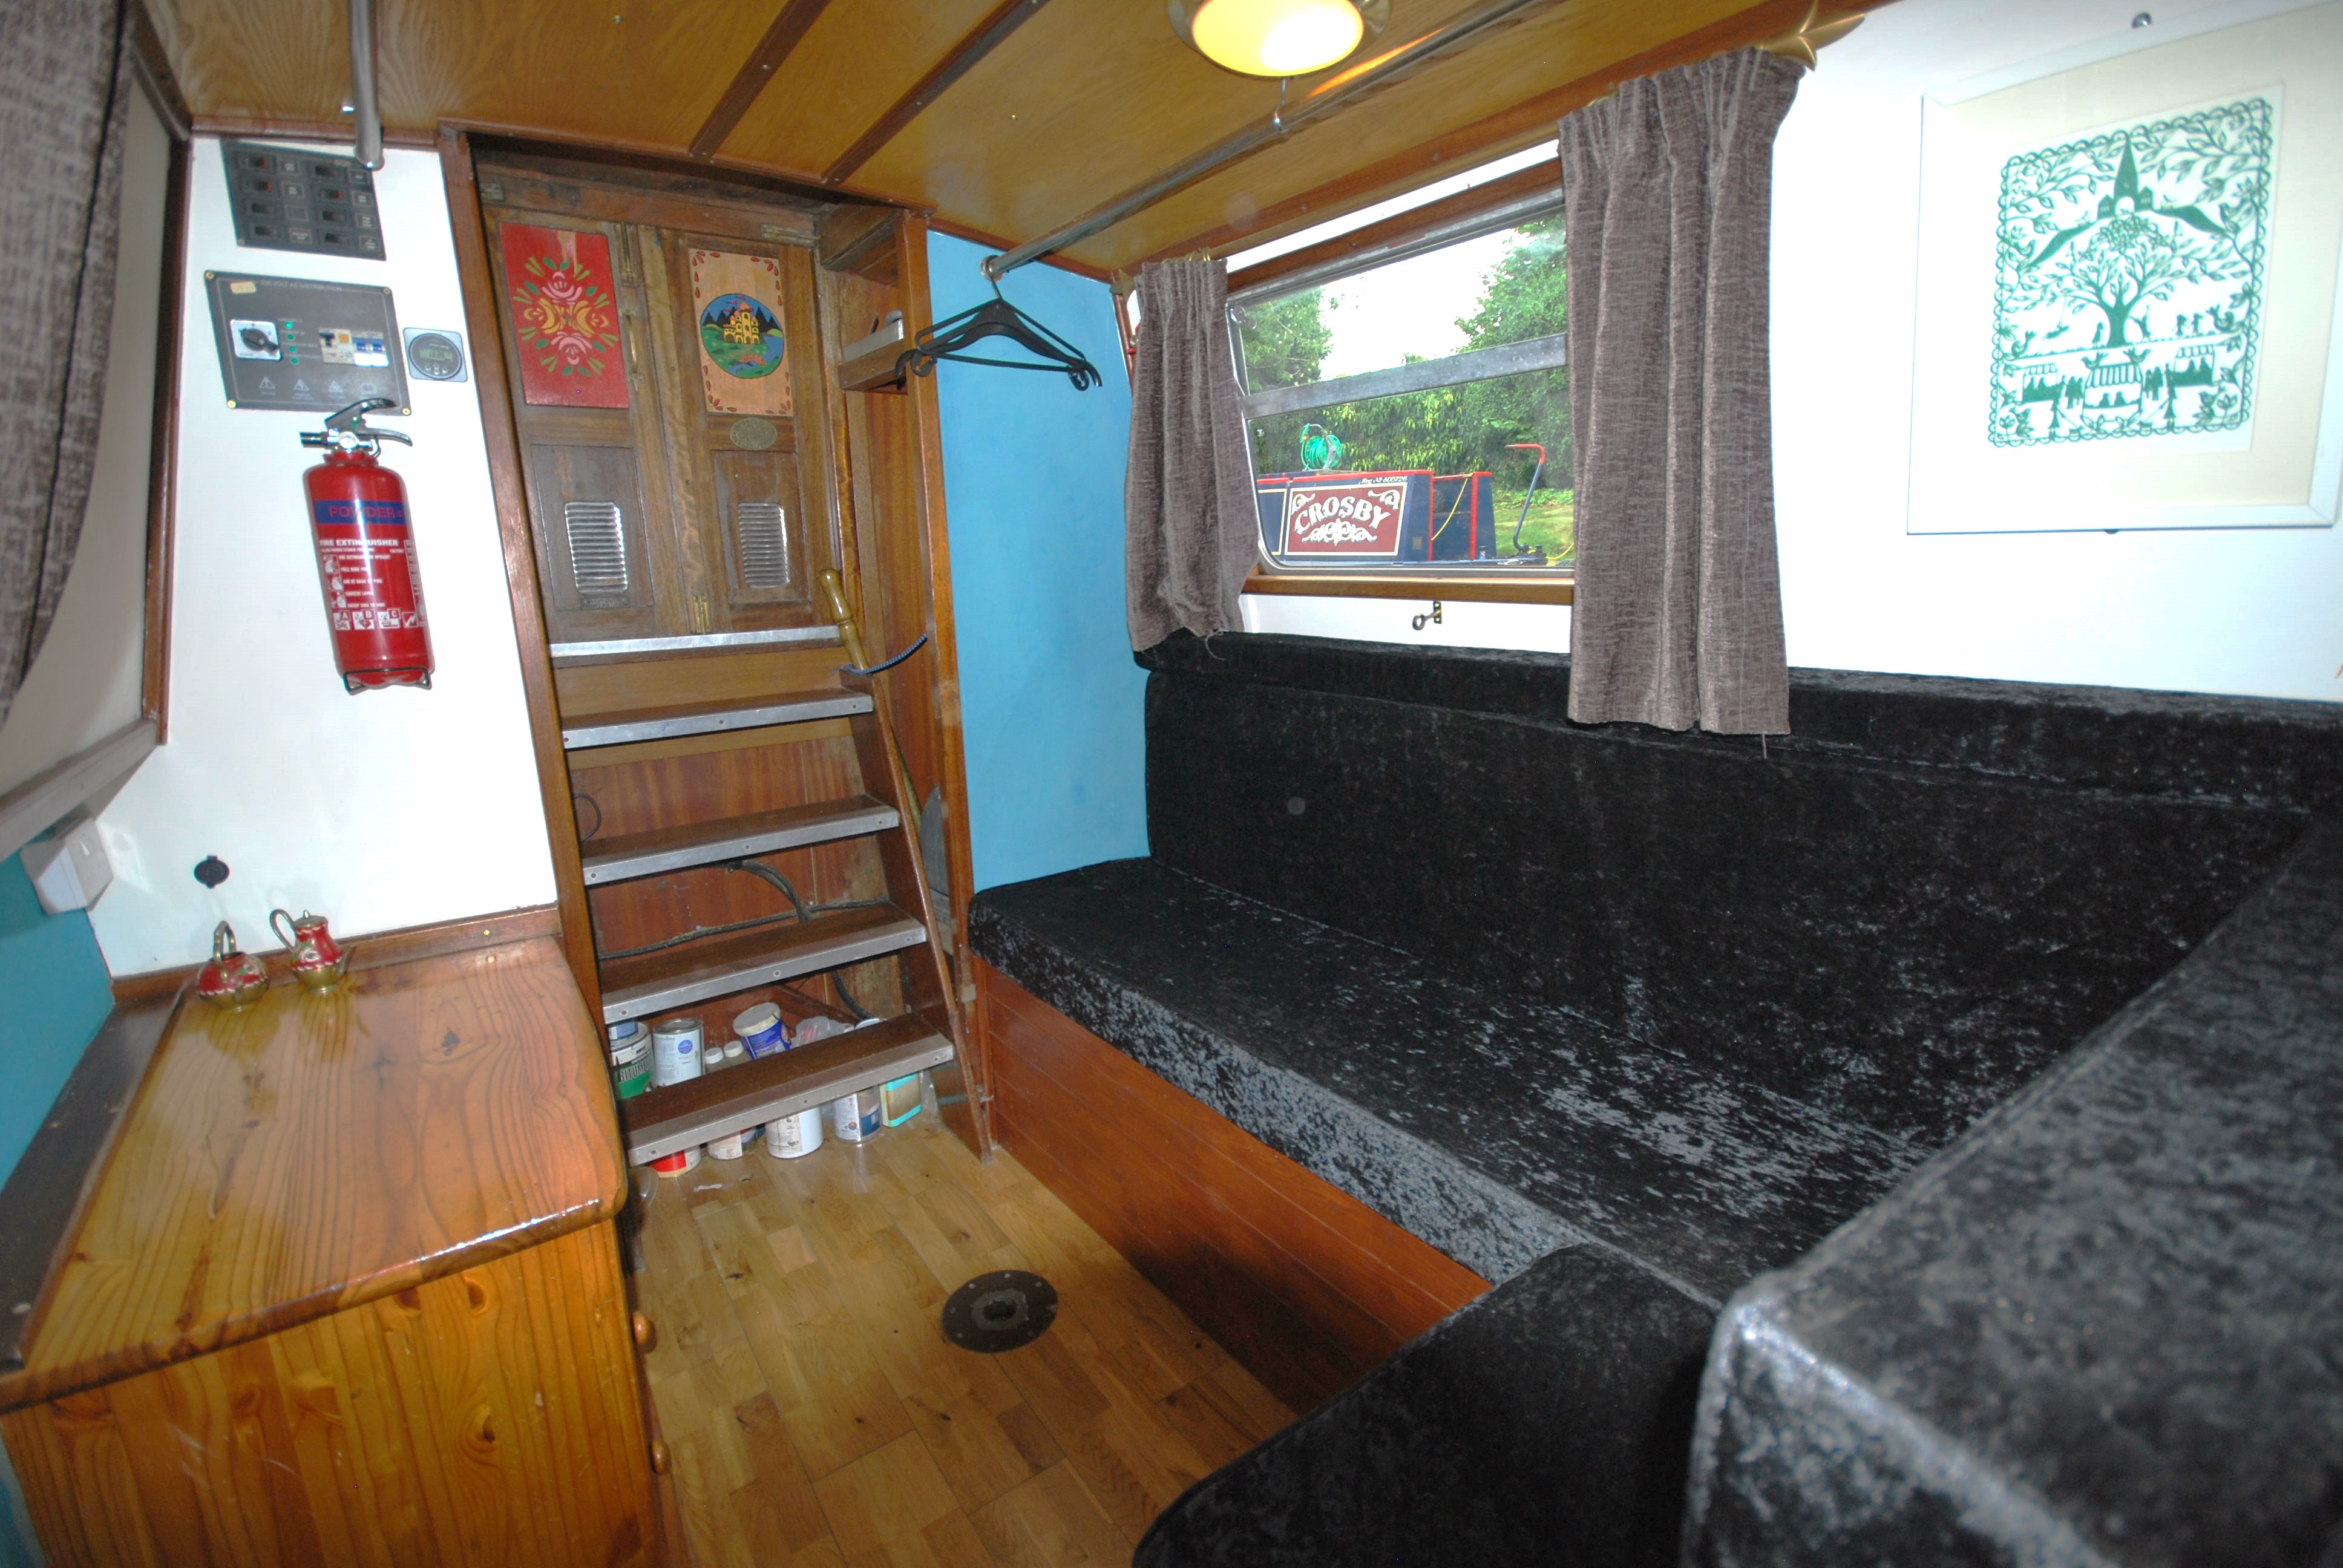 Luvly Jubbly - 56ft Cruiser Stern Liveaboard Narrowboat - For Sale 18